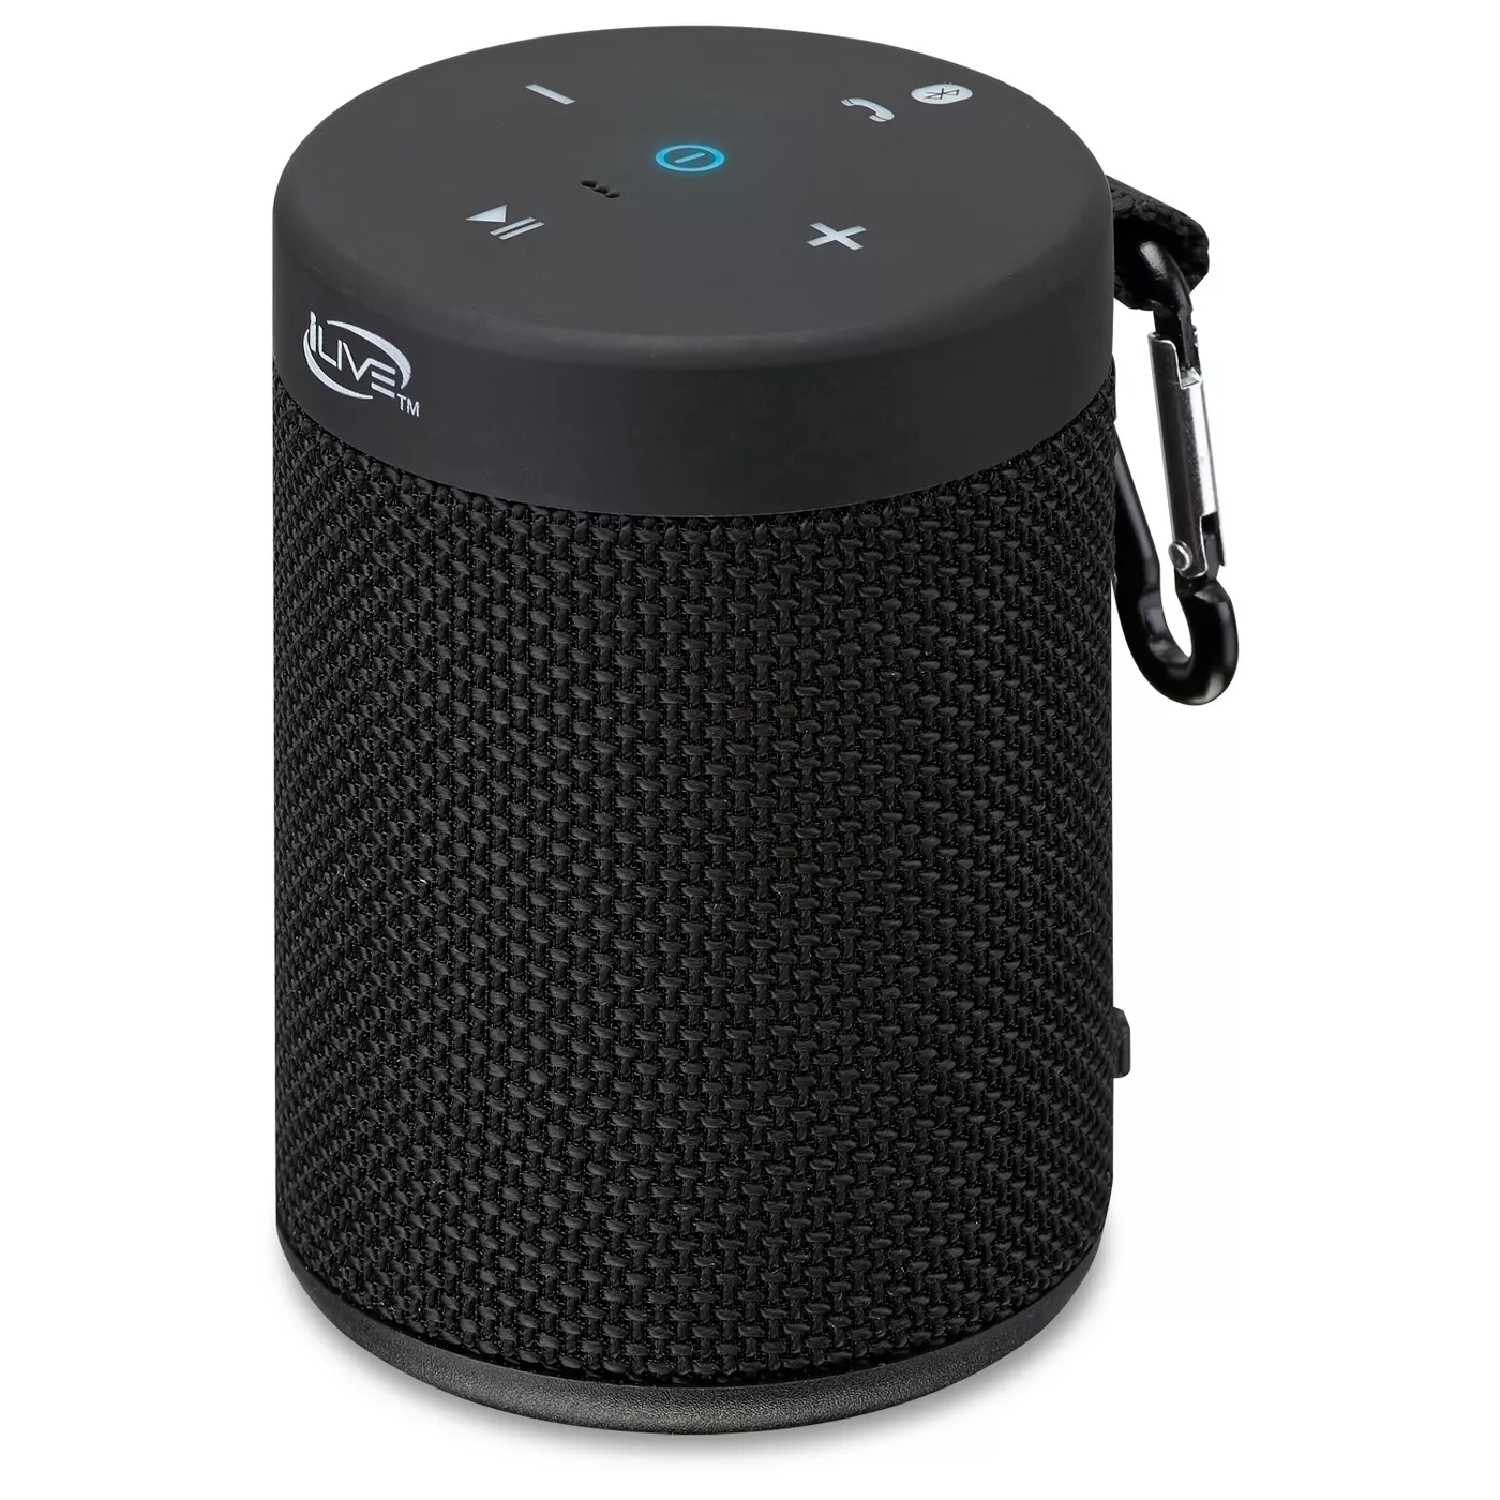 iLive Waterproof Fabric Wireless Speaker, 2.56 x 2.56 x 3.4 Inches, Built-in Rechargeable Battery, Black (ISBW108B)